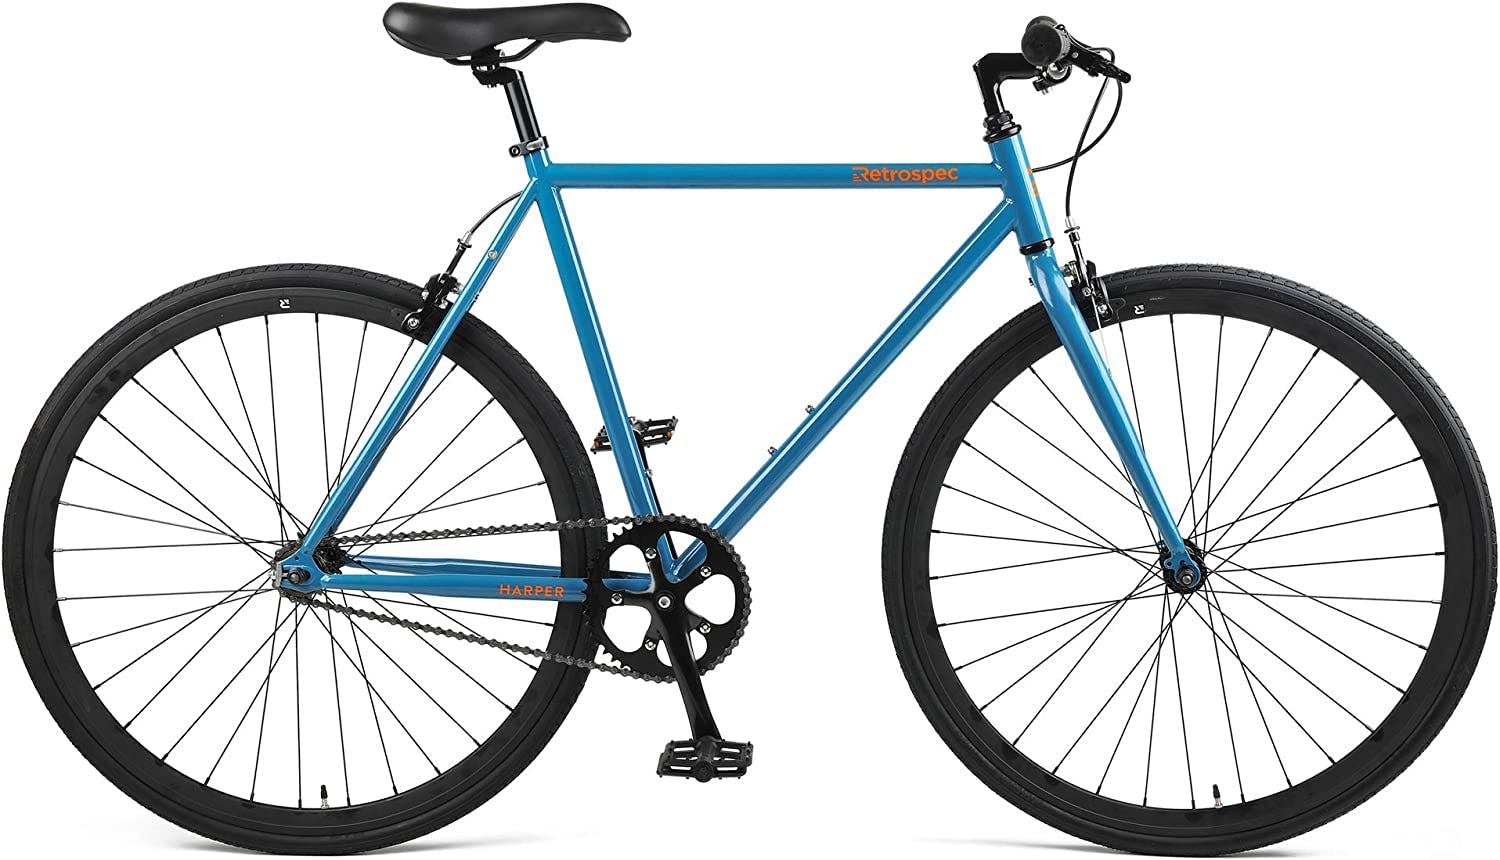 Retrospec Barron Comfort Hybrid Bike 21-Speed with Front Suspension and 700c Wheels with Multi-Surface Tires 